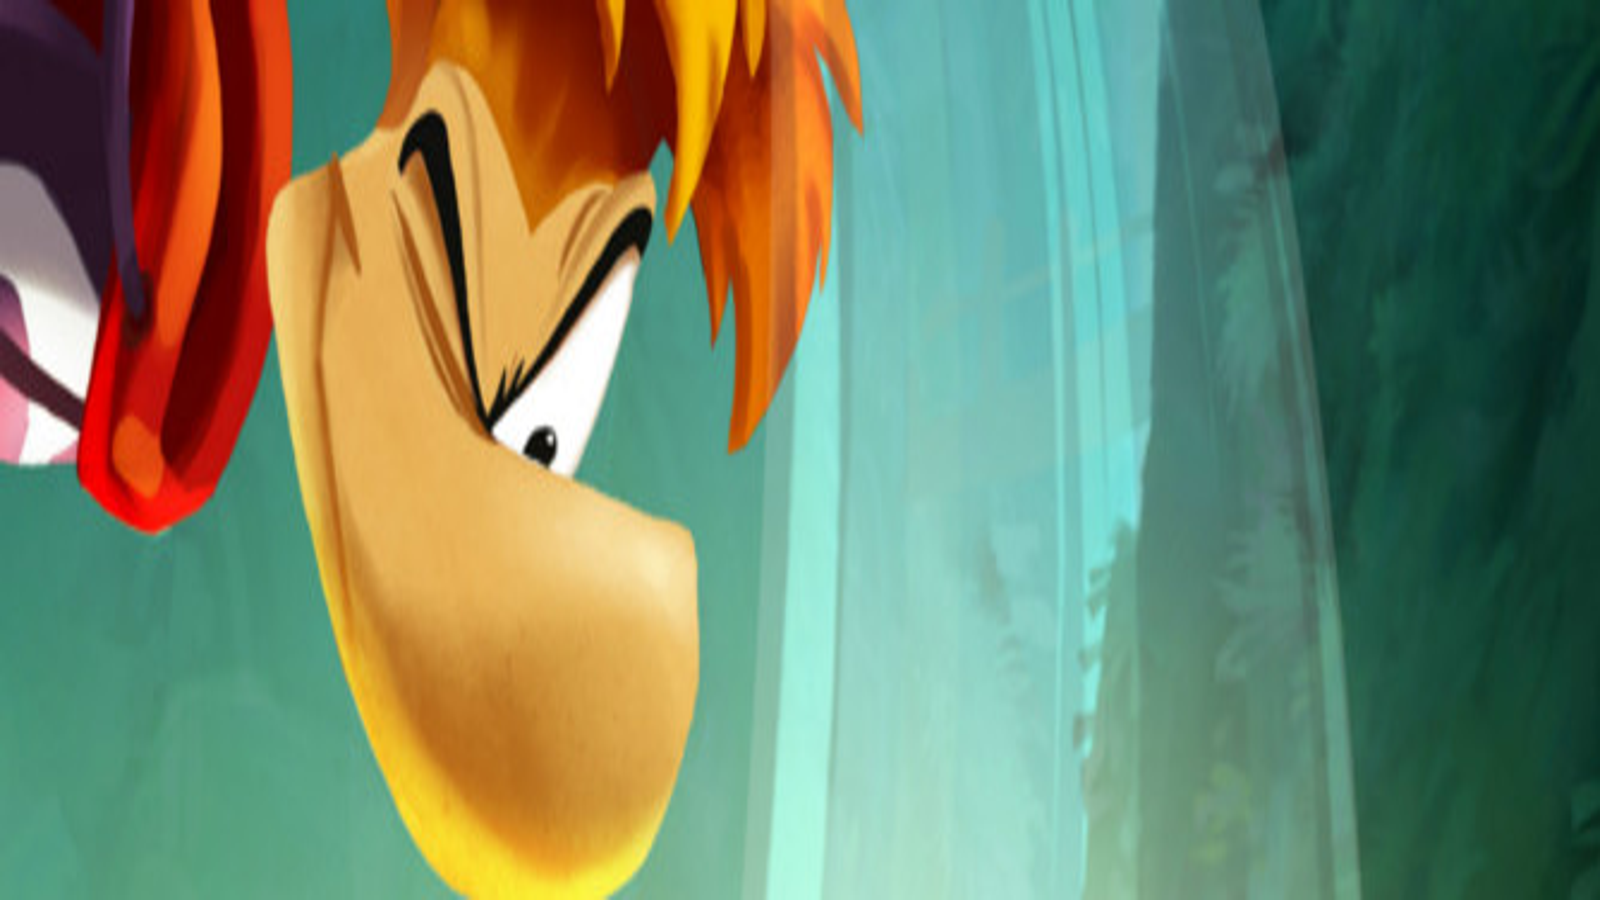 Rayman Legends delayed, Ubisoft now planning Xbox 360 and PS3 versions